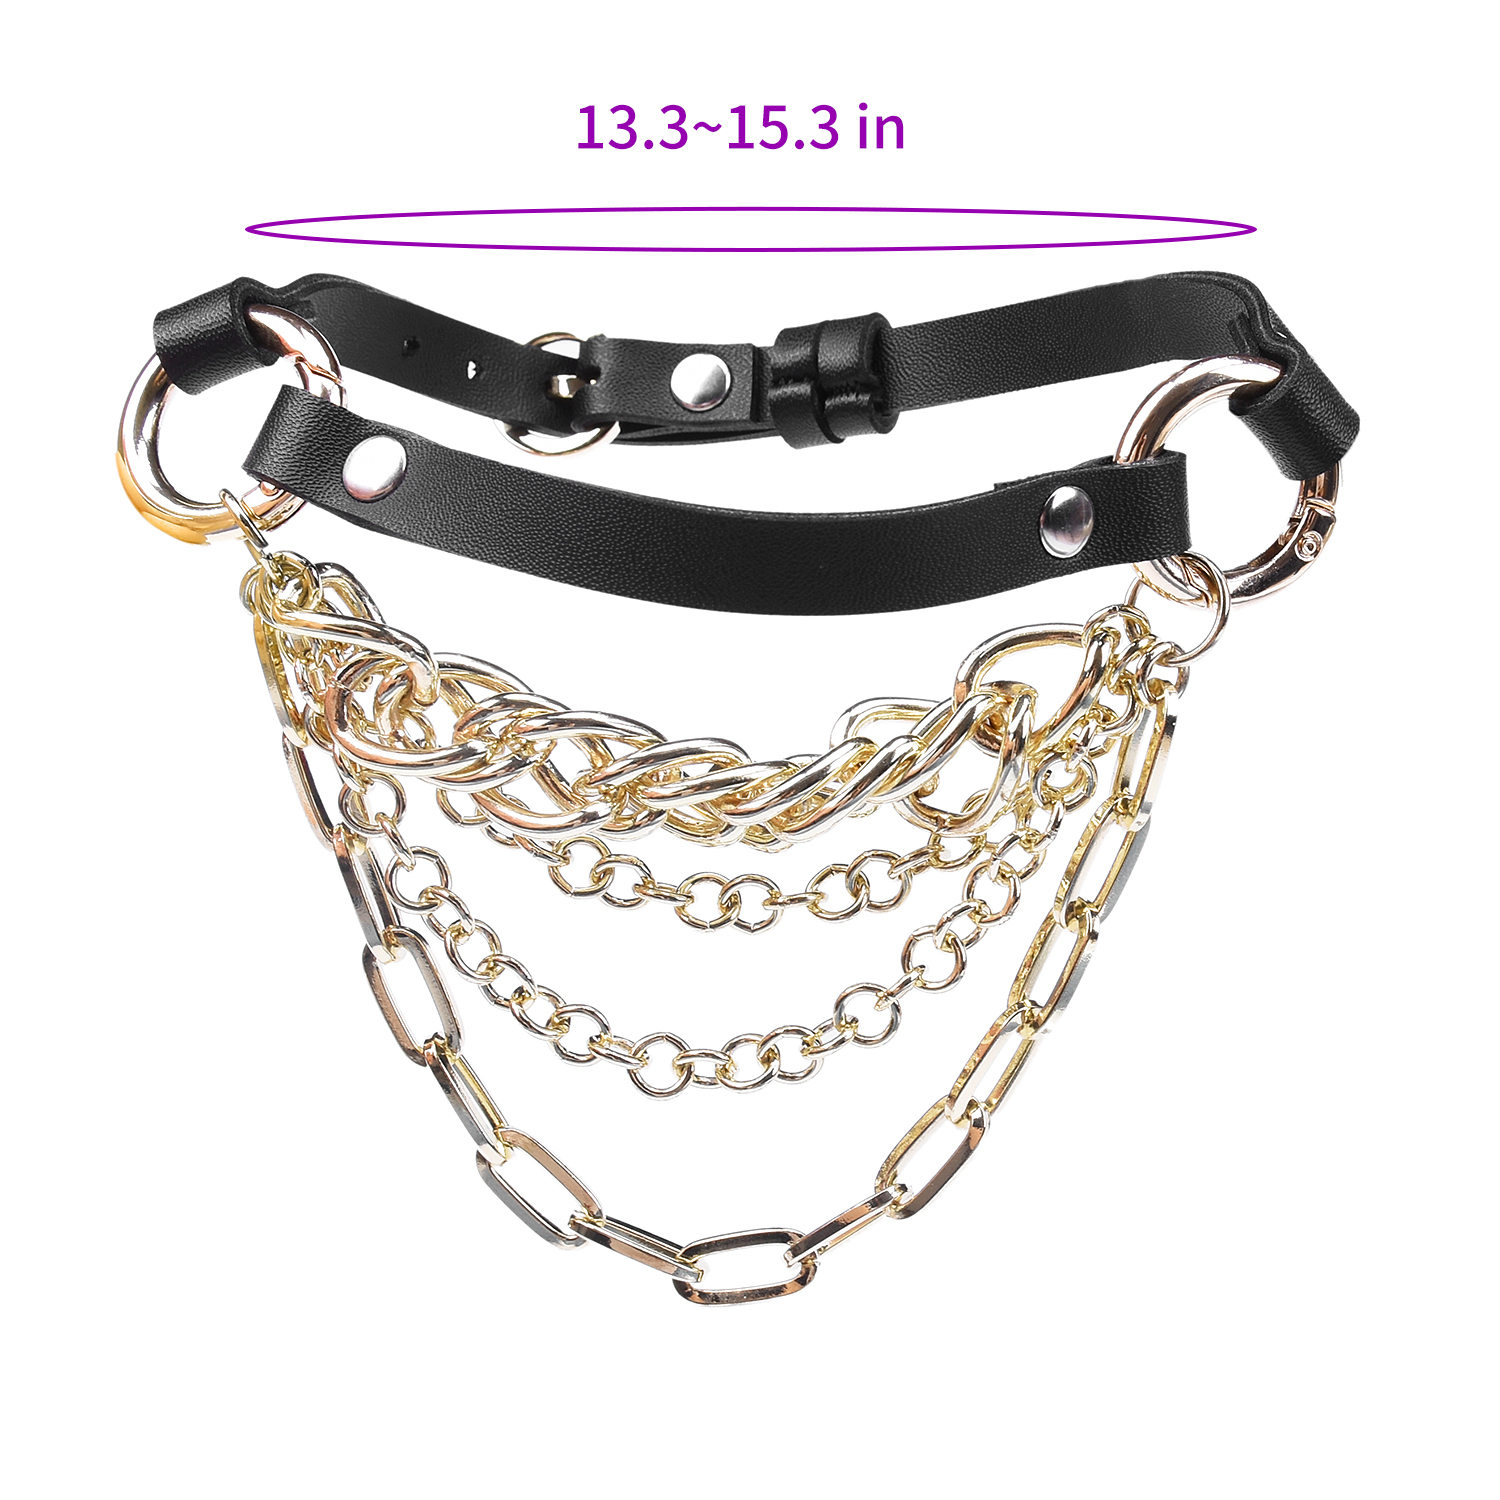 Open-Body Chain Harness with Leather Collar